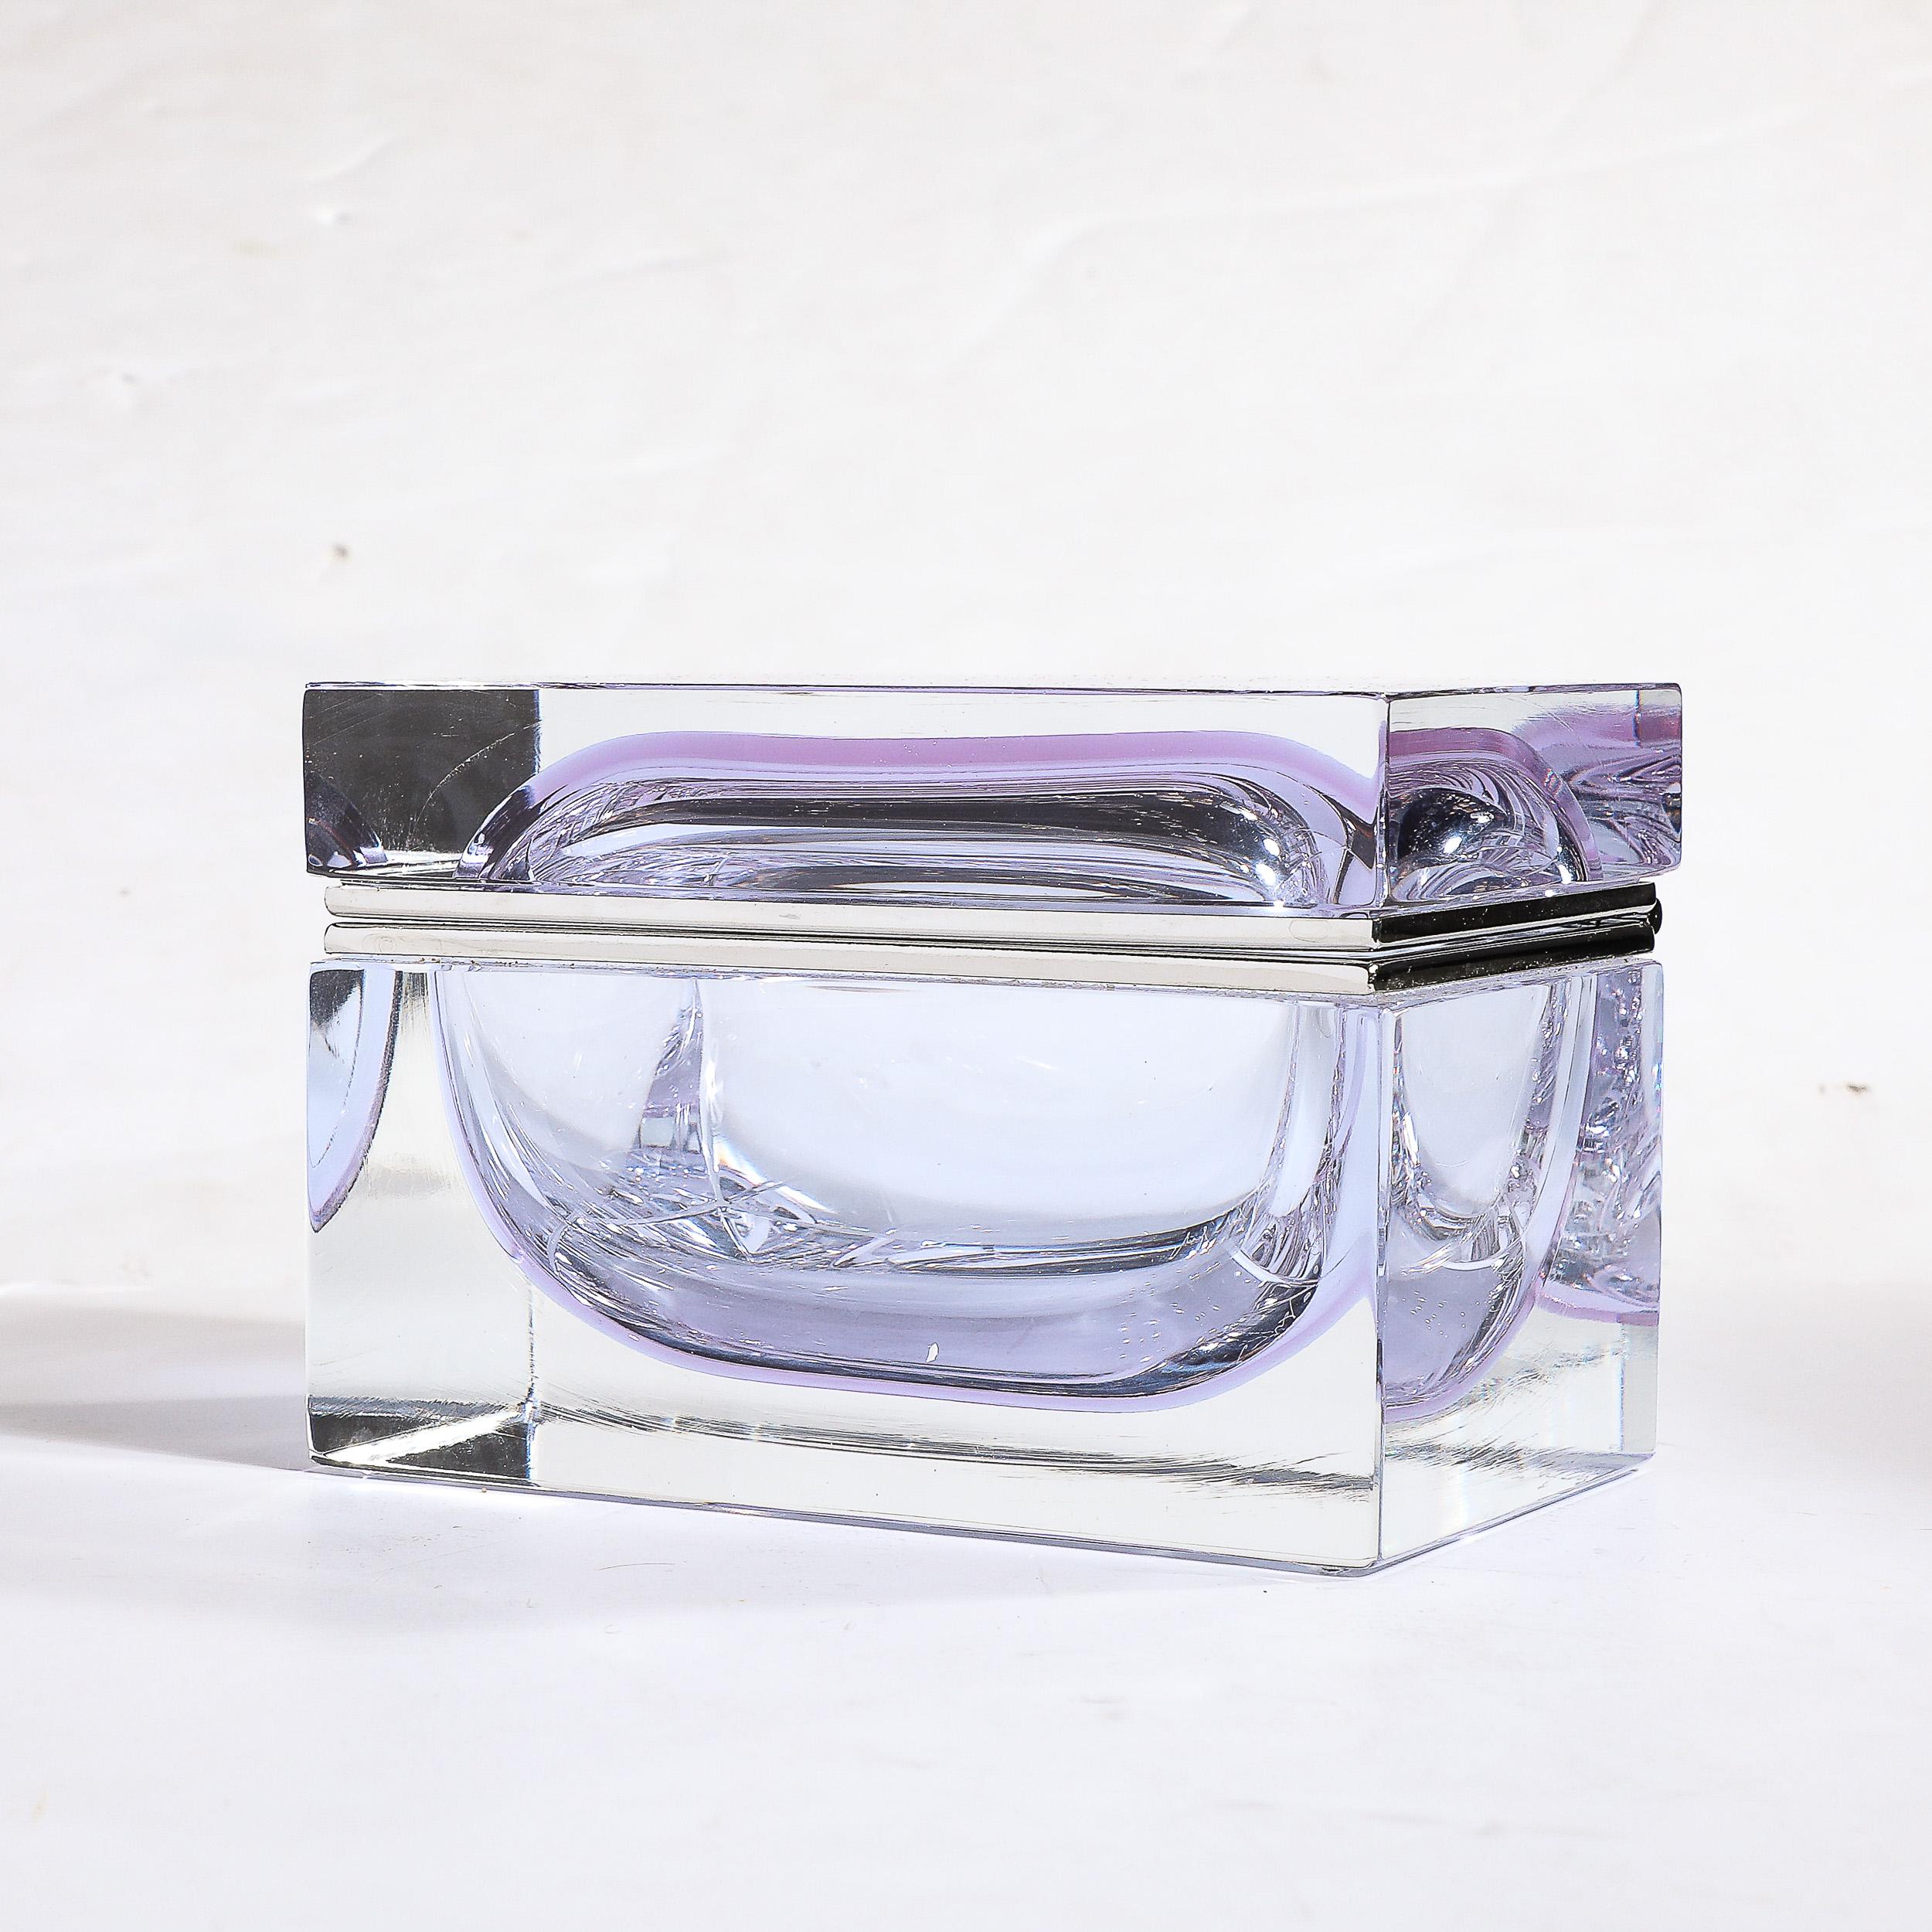 Modernist Hand-Blown Murano Glass Box in Lavender with Nickel Fittings For Sale 10